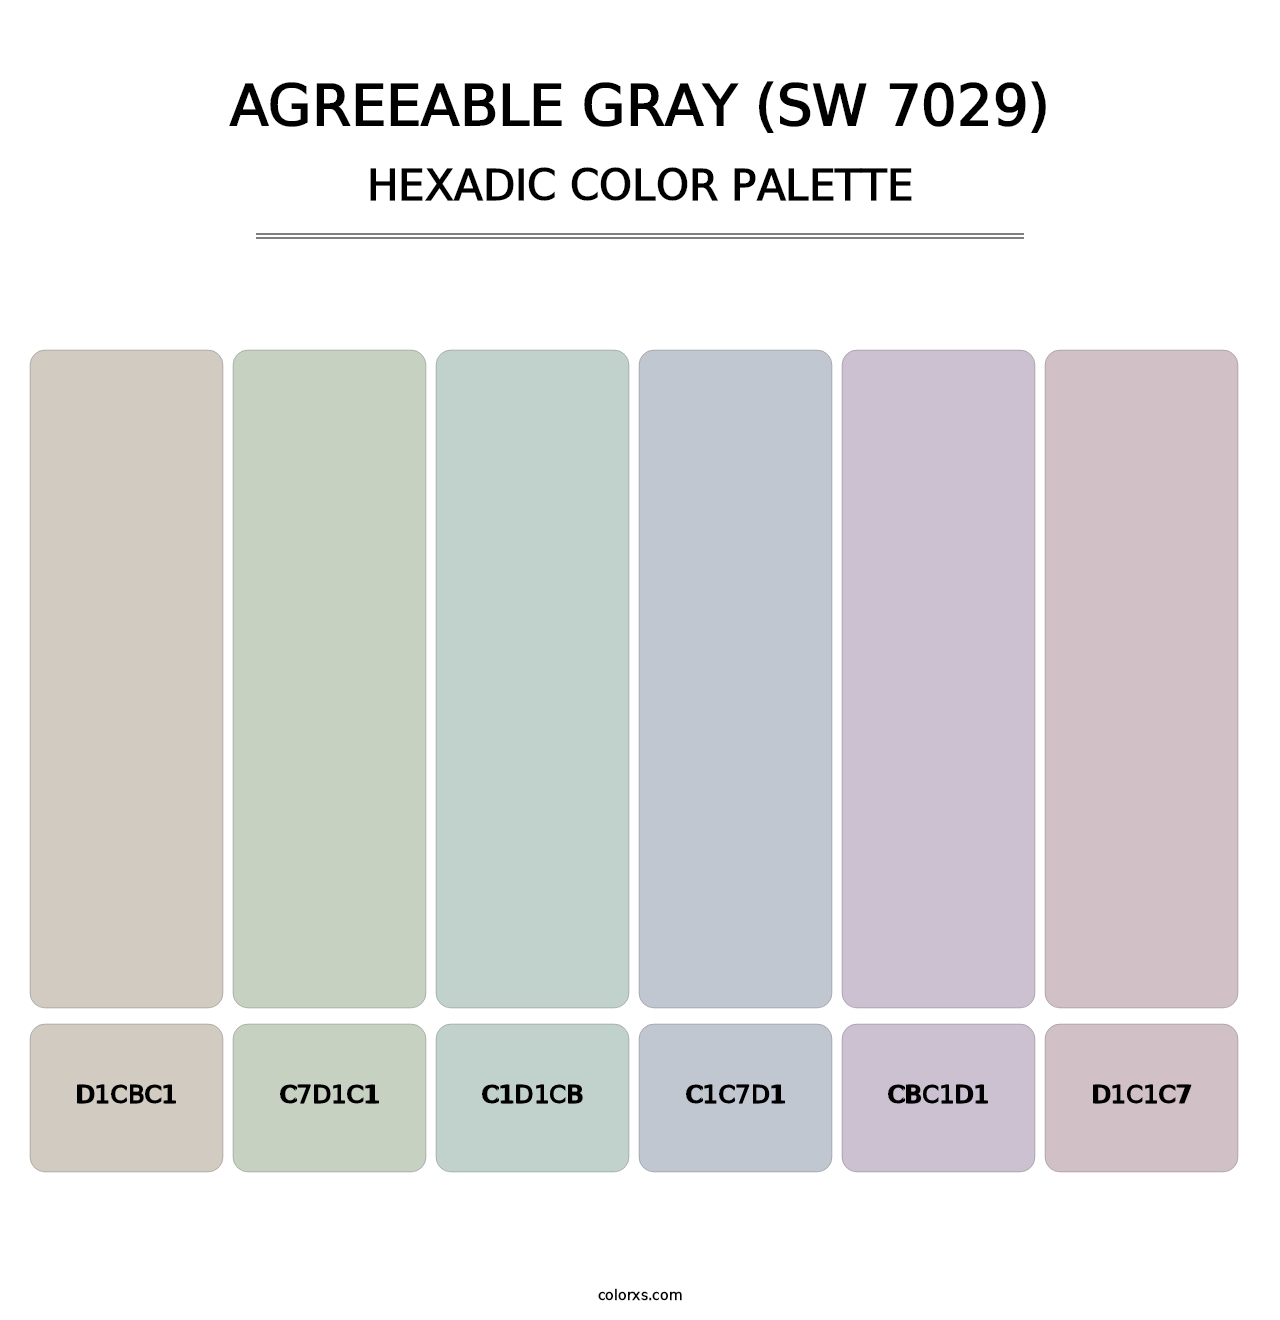 Agreeable Gray (SW 7029) - Hexadic Color Palette